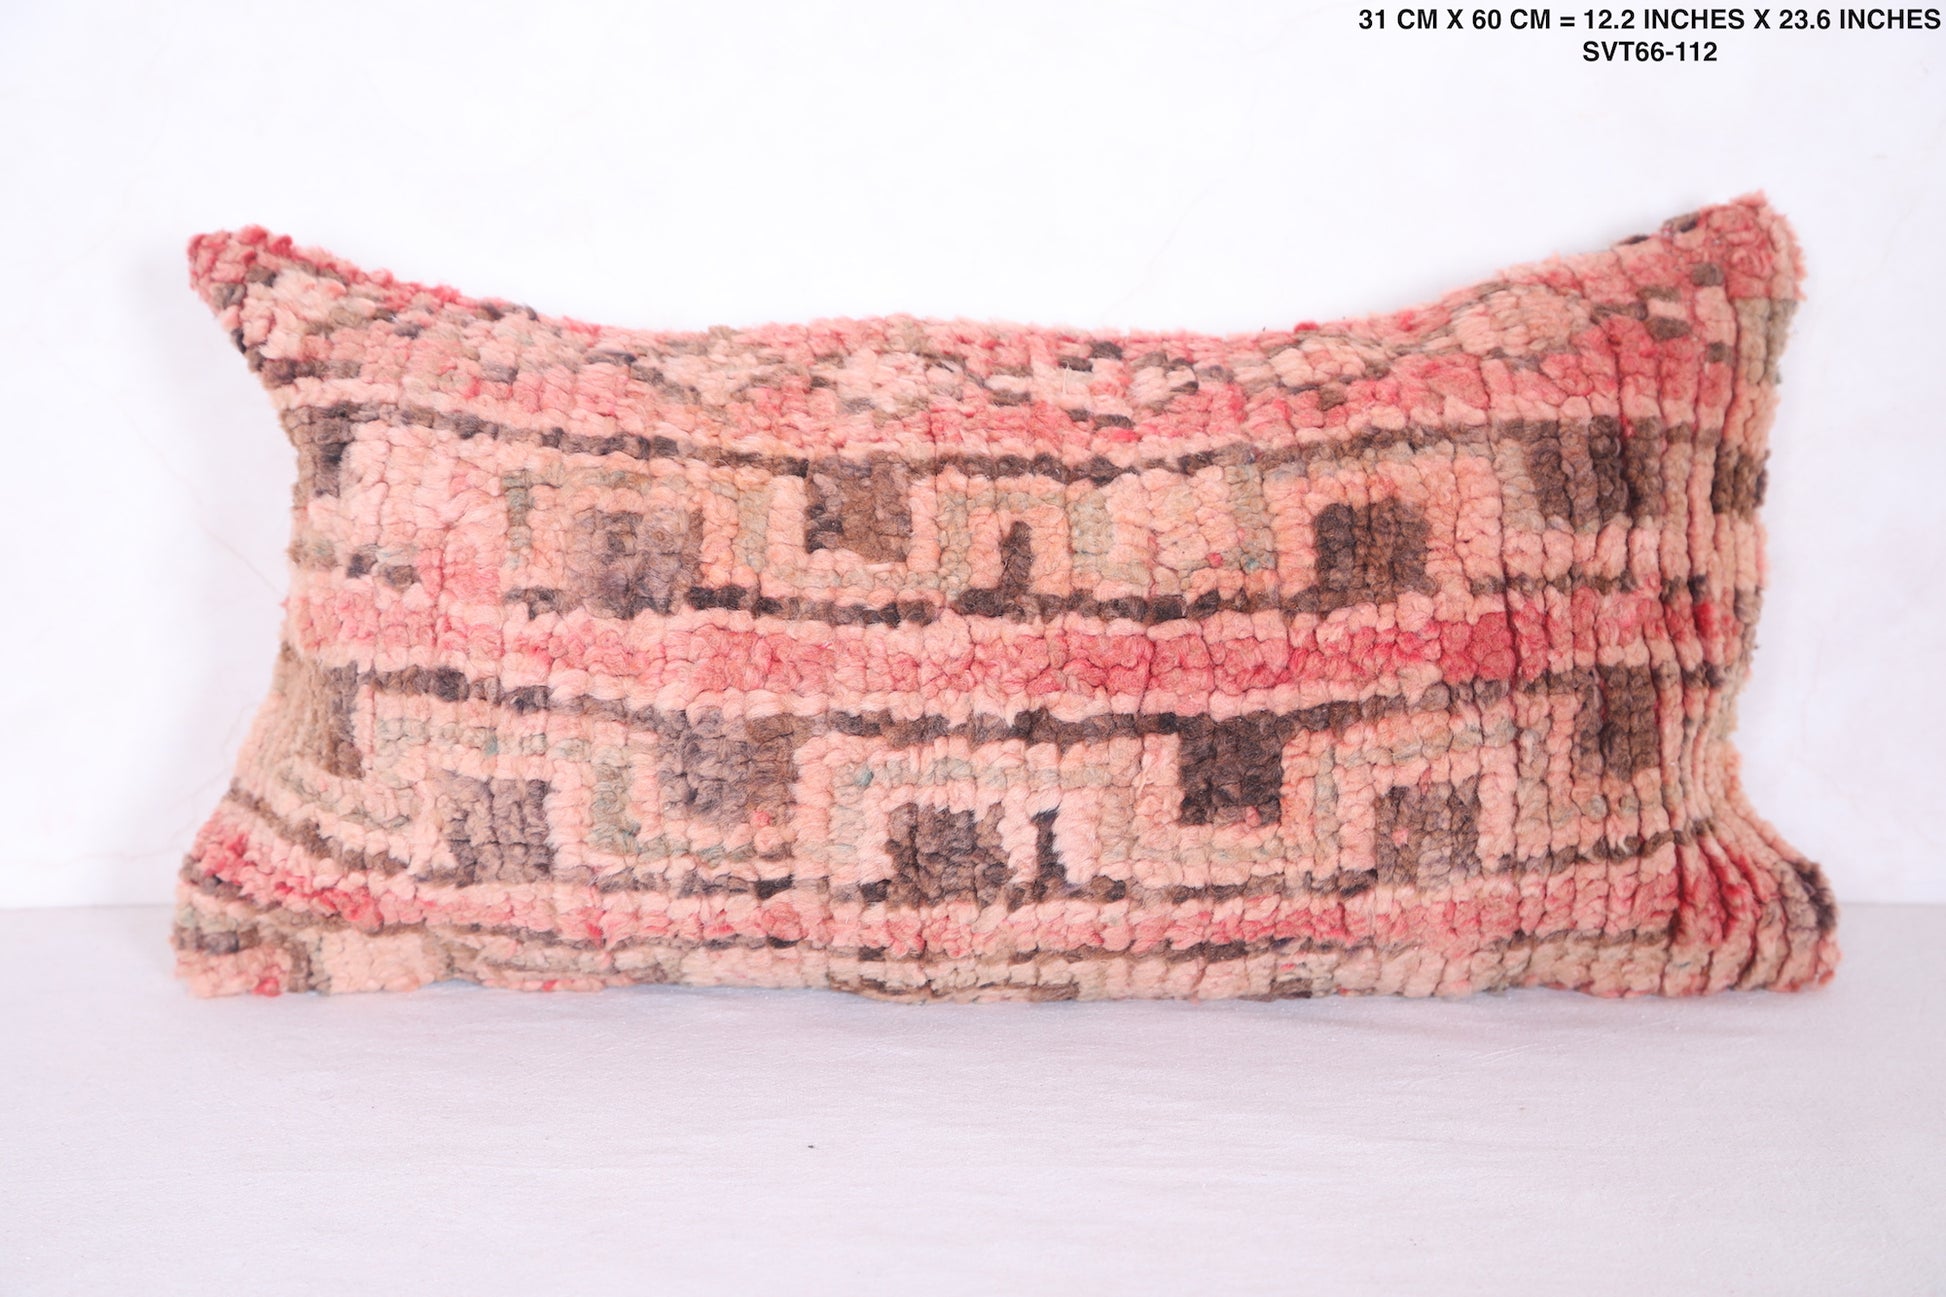 Moroccan handmade rug pillows 12.2 INCHES X 23.6 INCHES